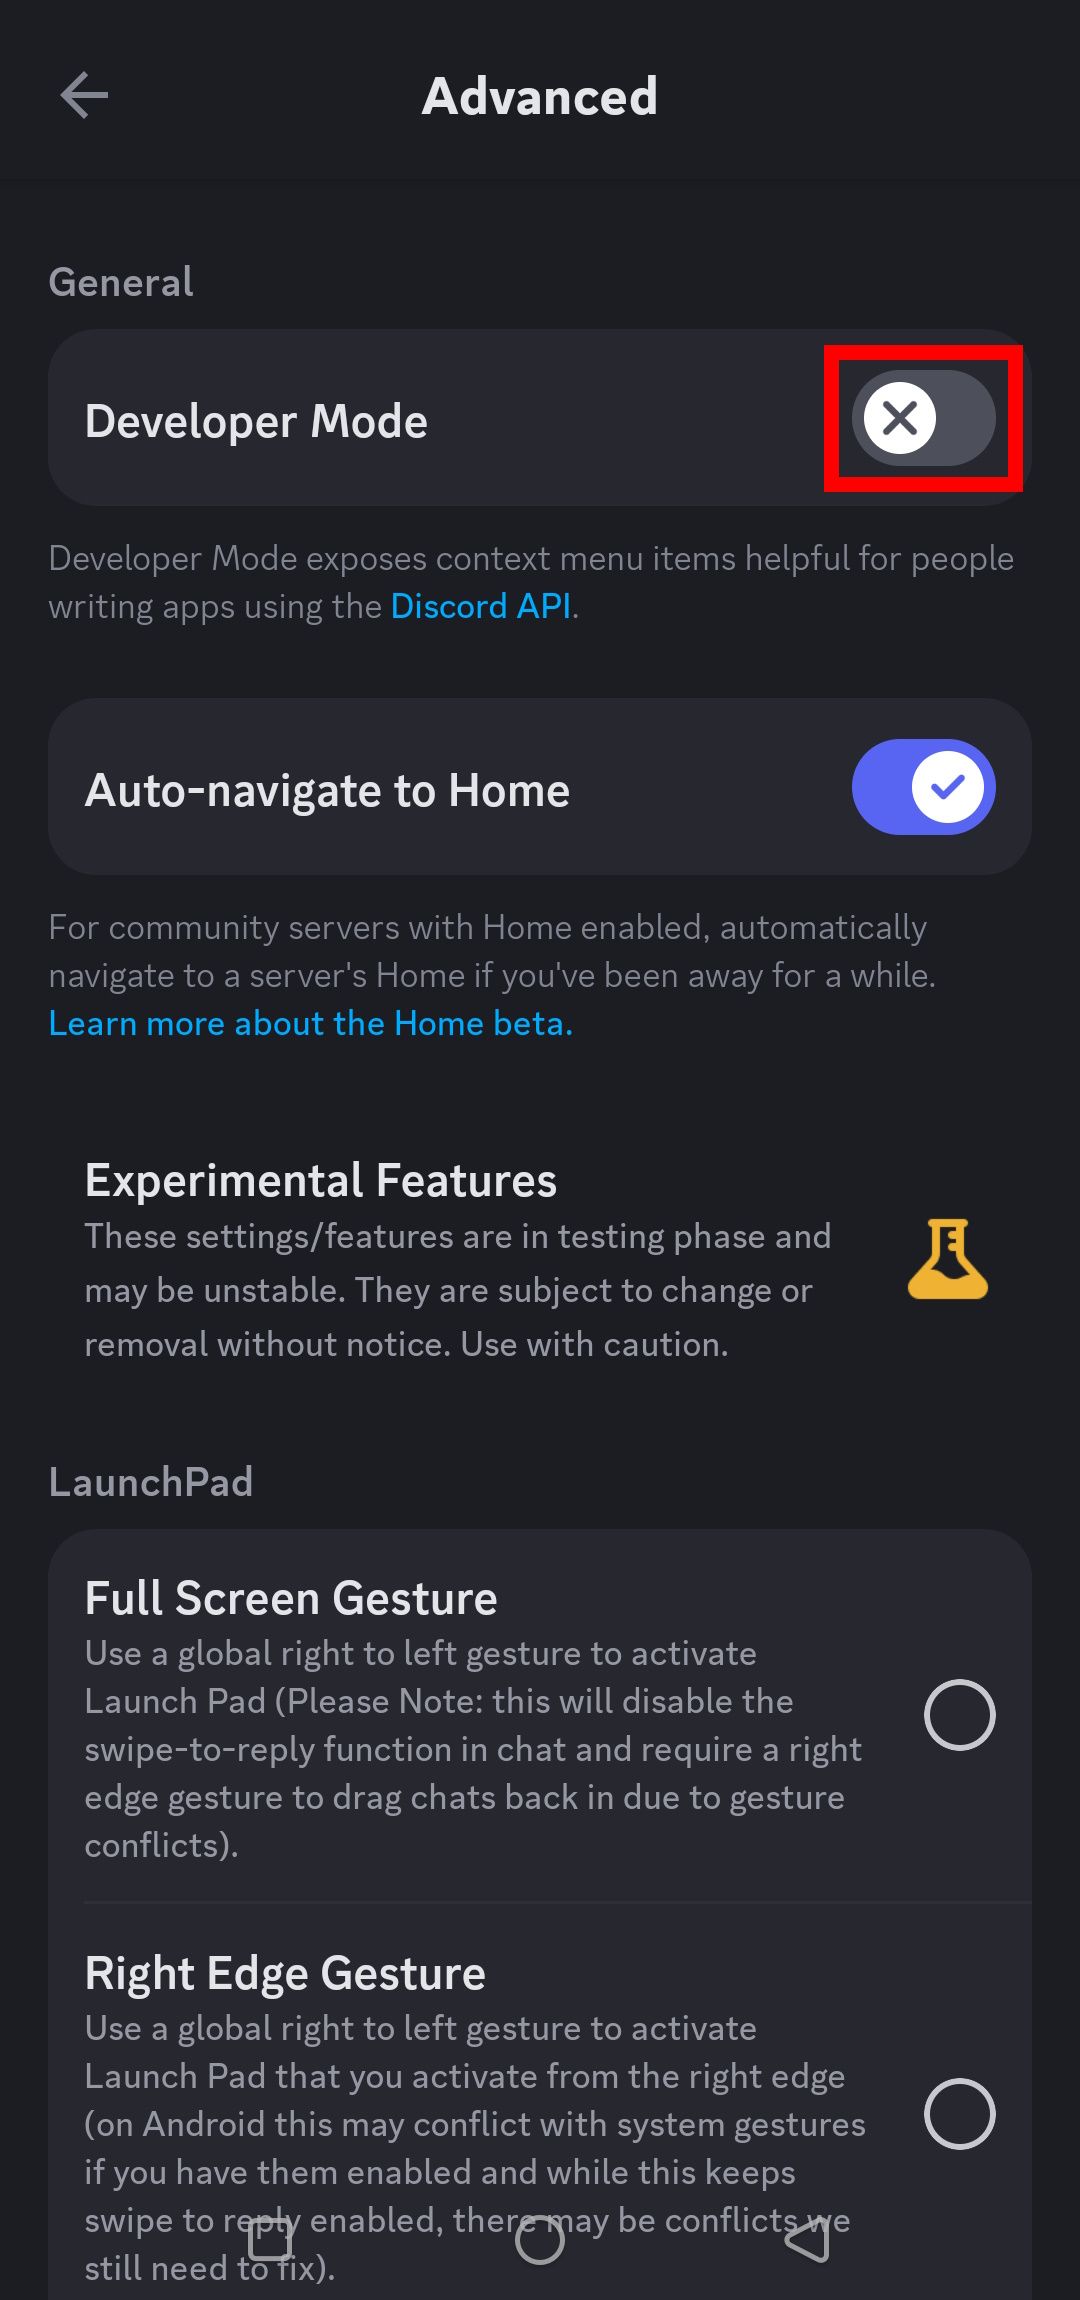 red rectangle over the developer mode toggle option